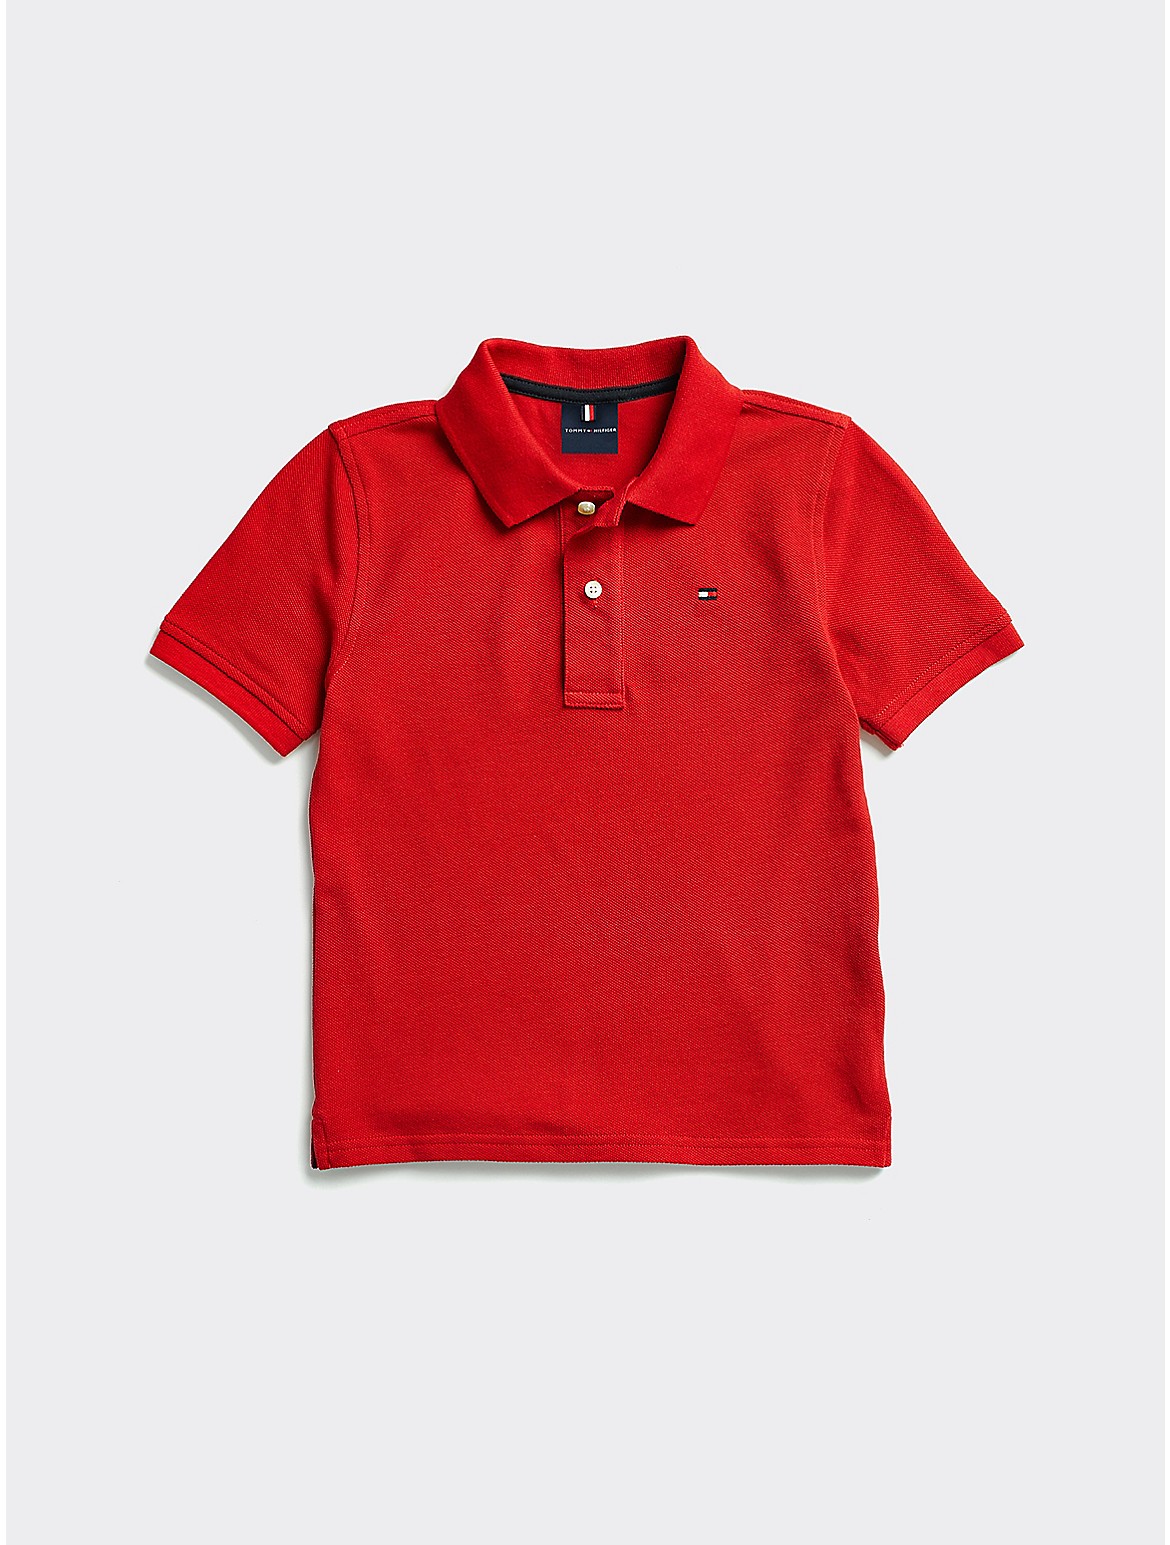 Tommy Hilfiger Boys' Classic Polo - Red - L